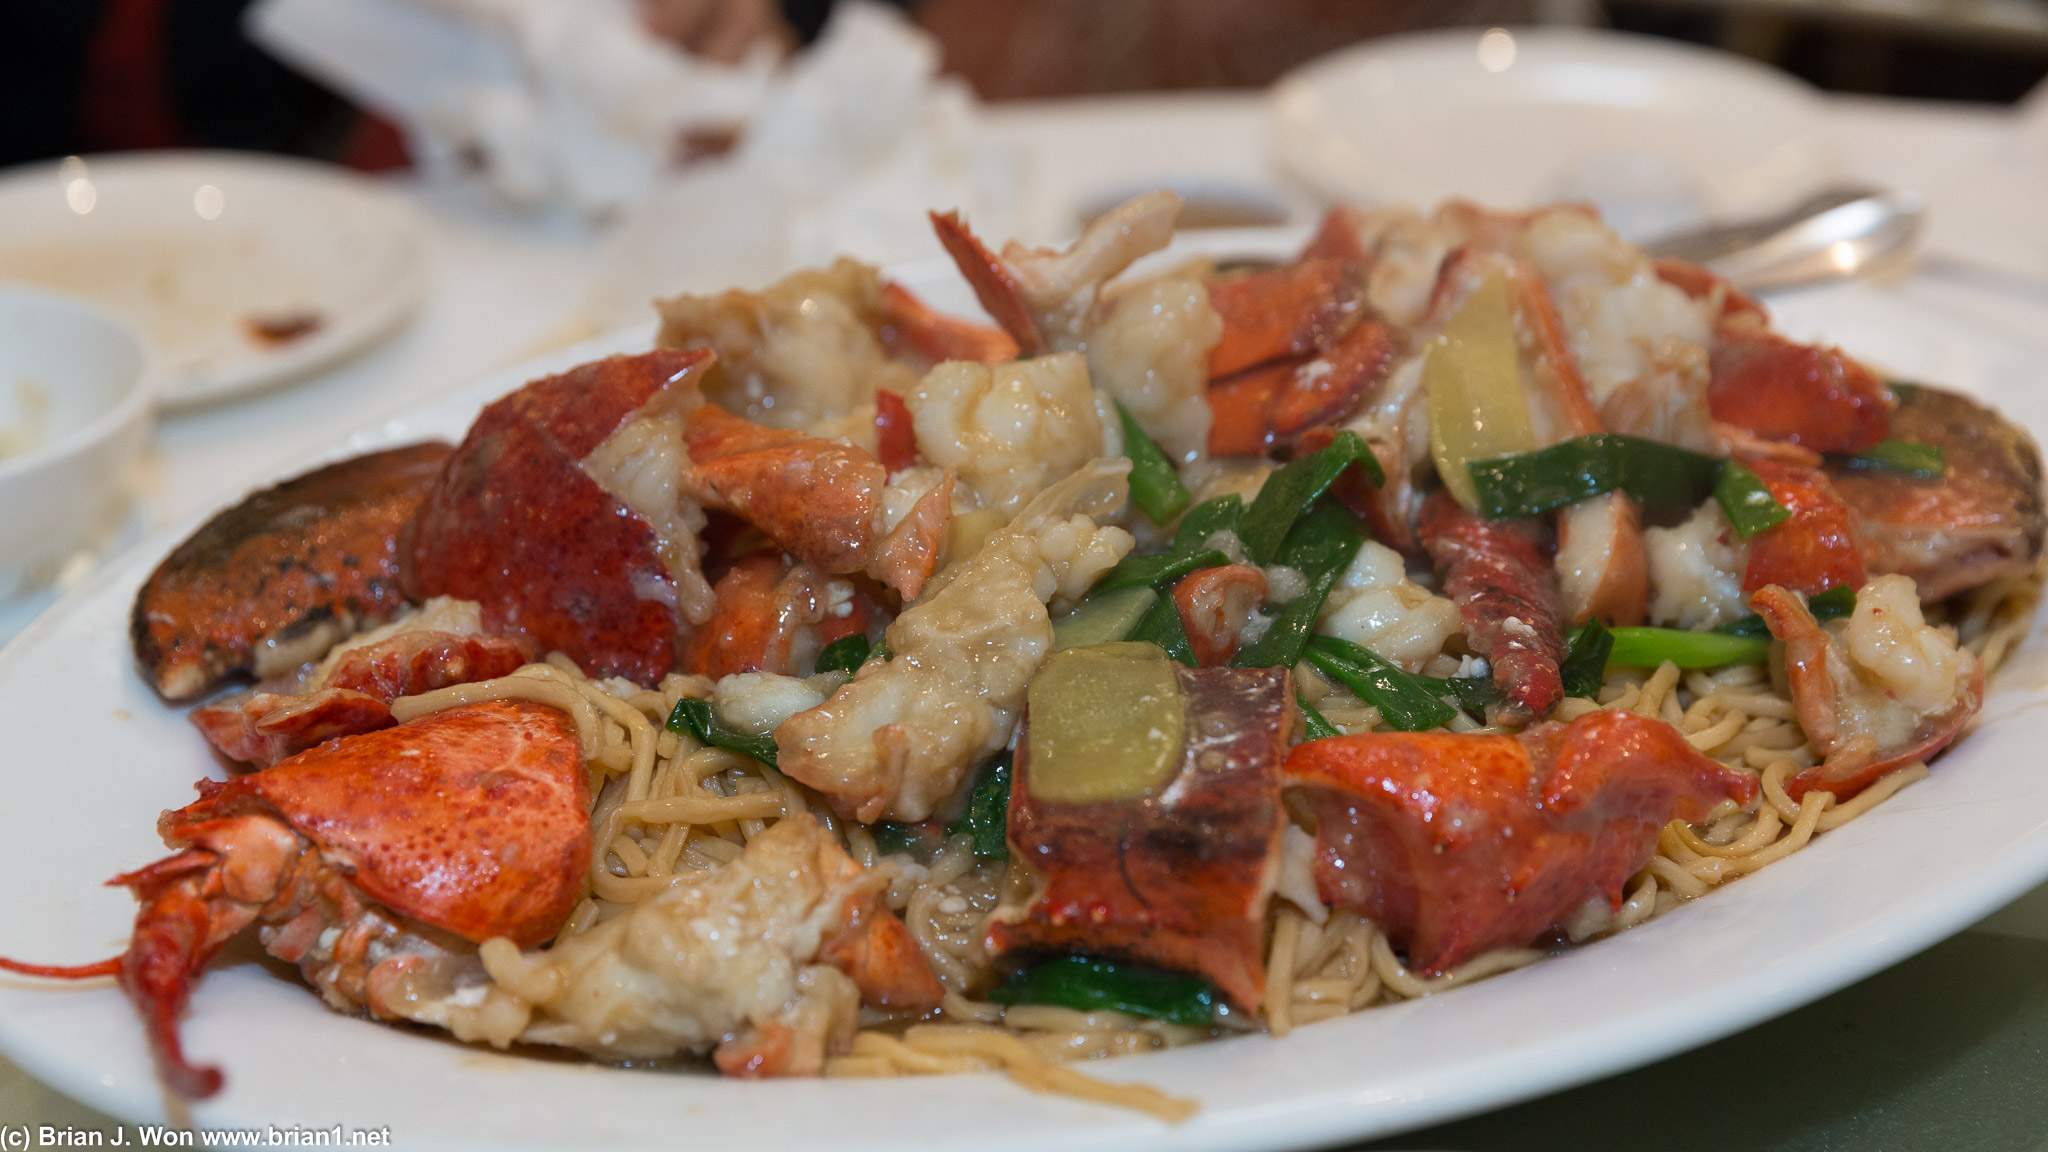 Lobster yee mein with some GIGANTIC lobster.